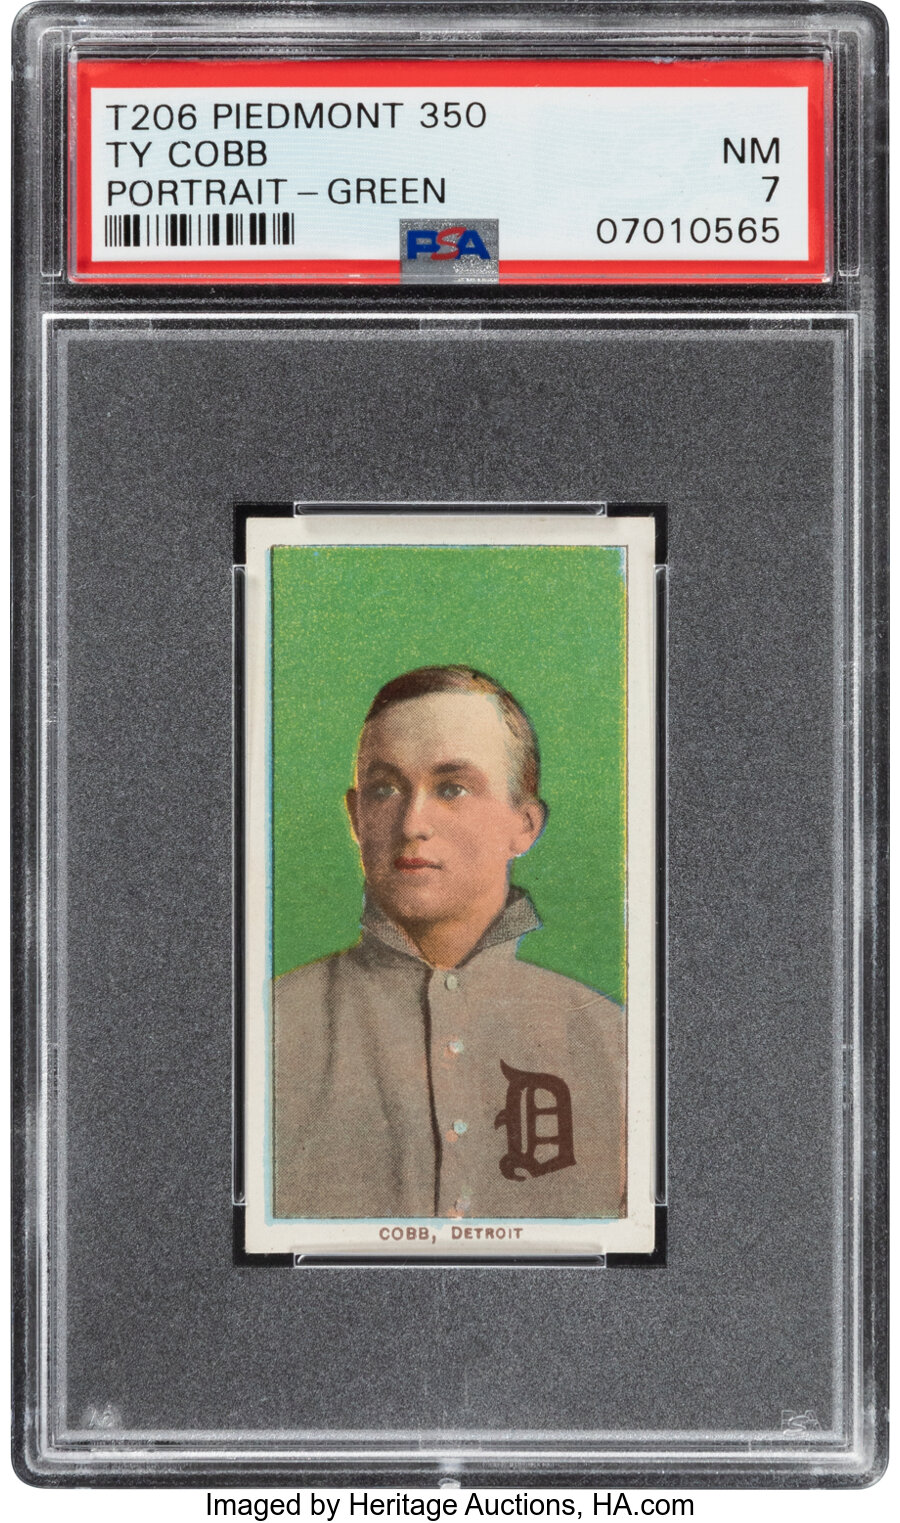 1909-11 T206 Piedmont 350 Ty Cobb (Portrait Green) PSA NM 7 - Pop One, One Higher for Brand/Series!